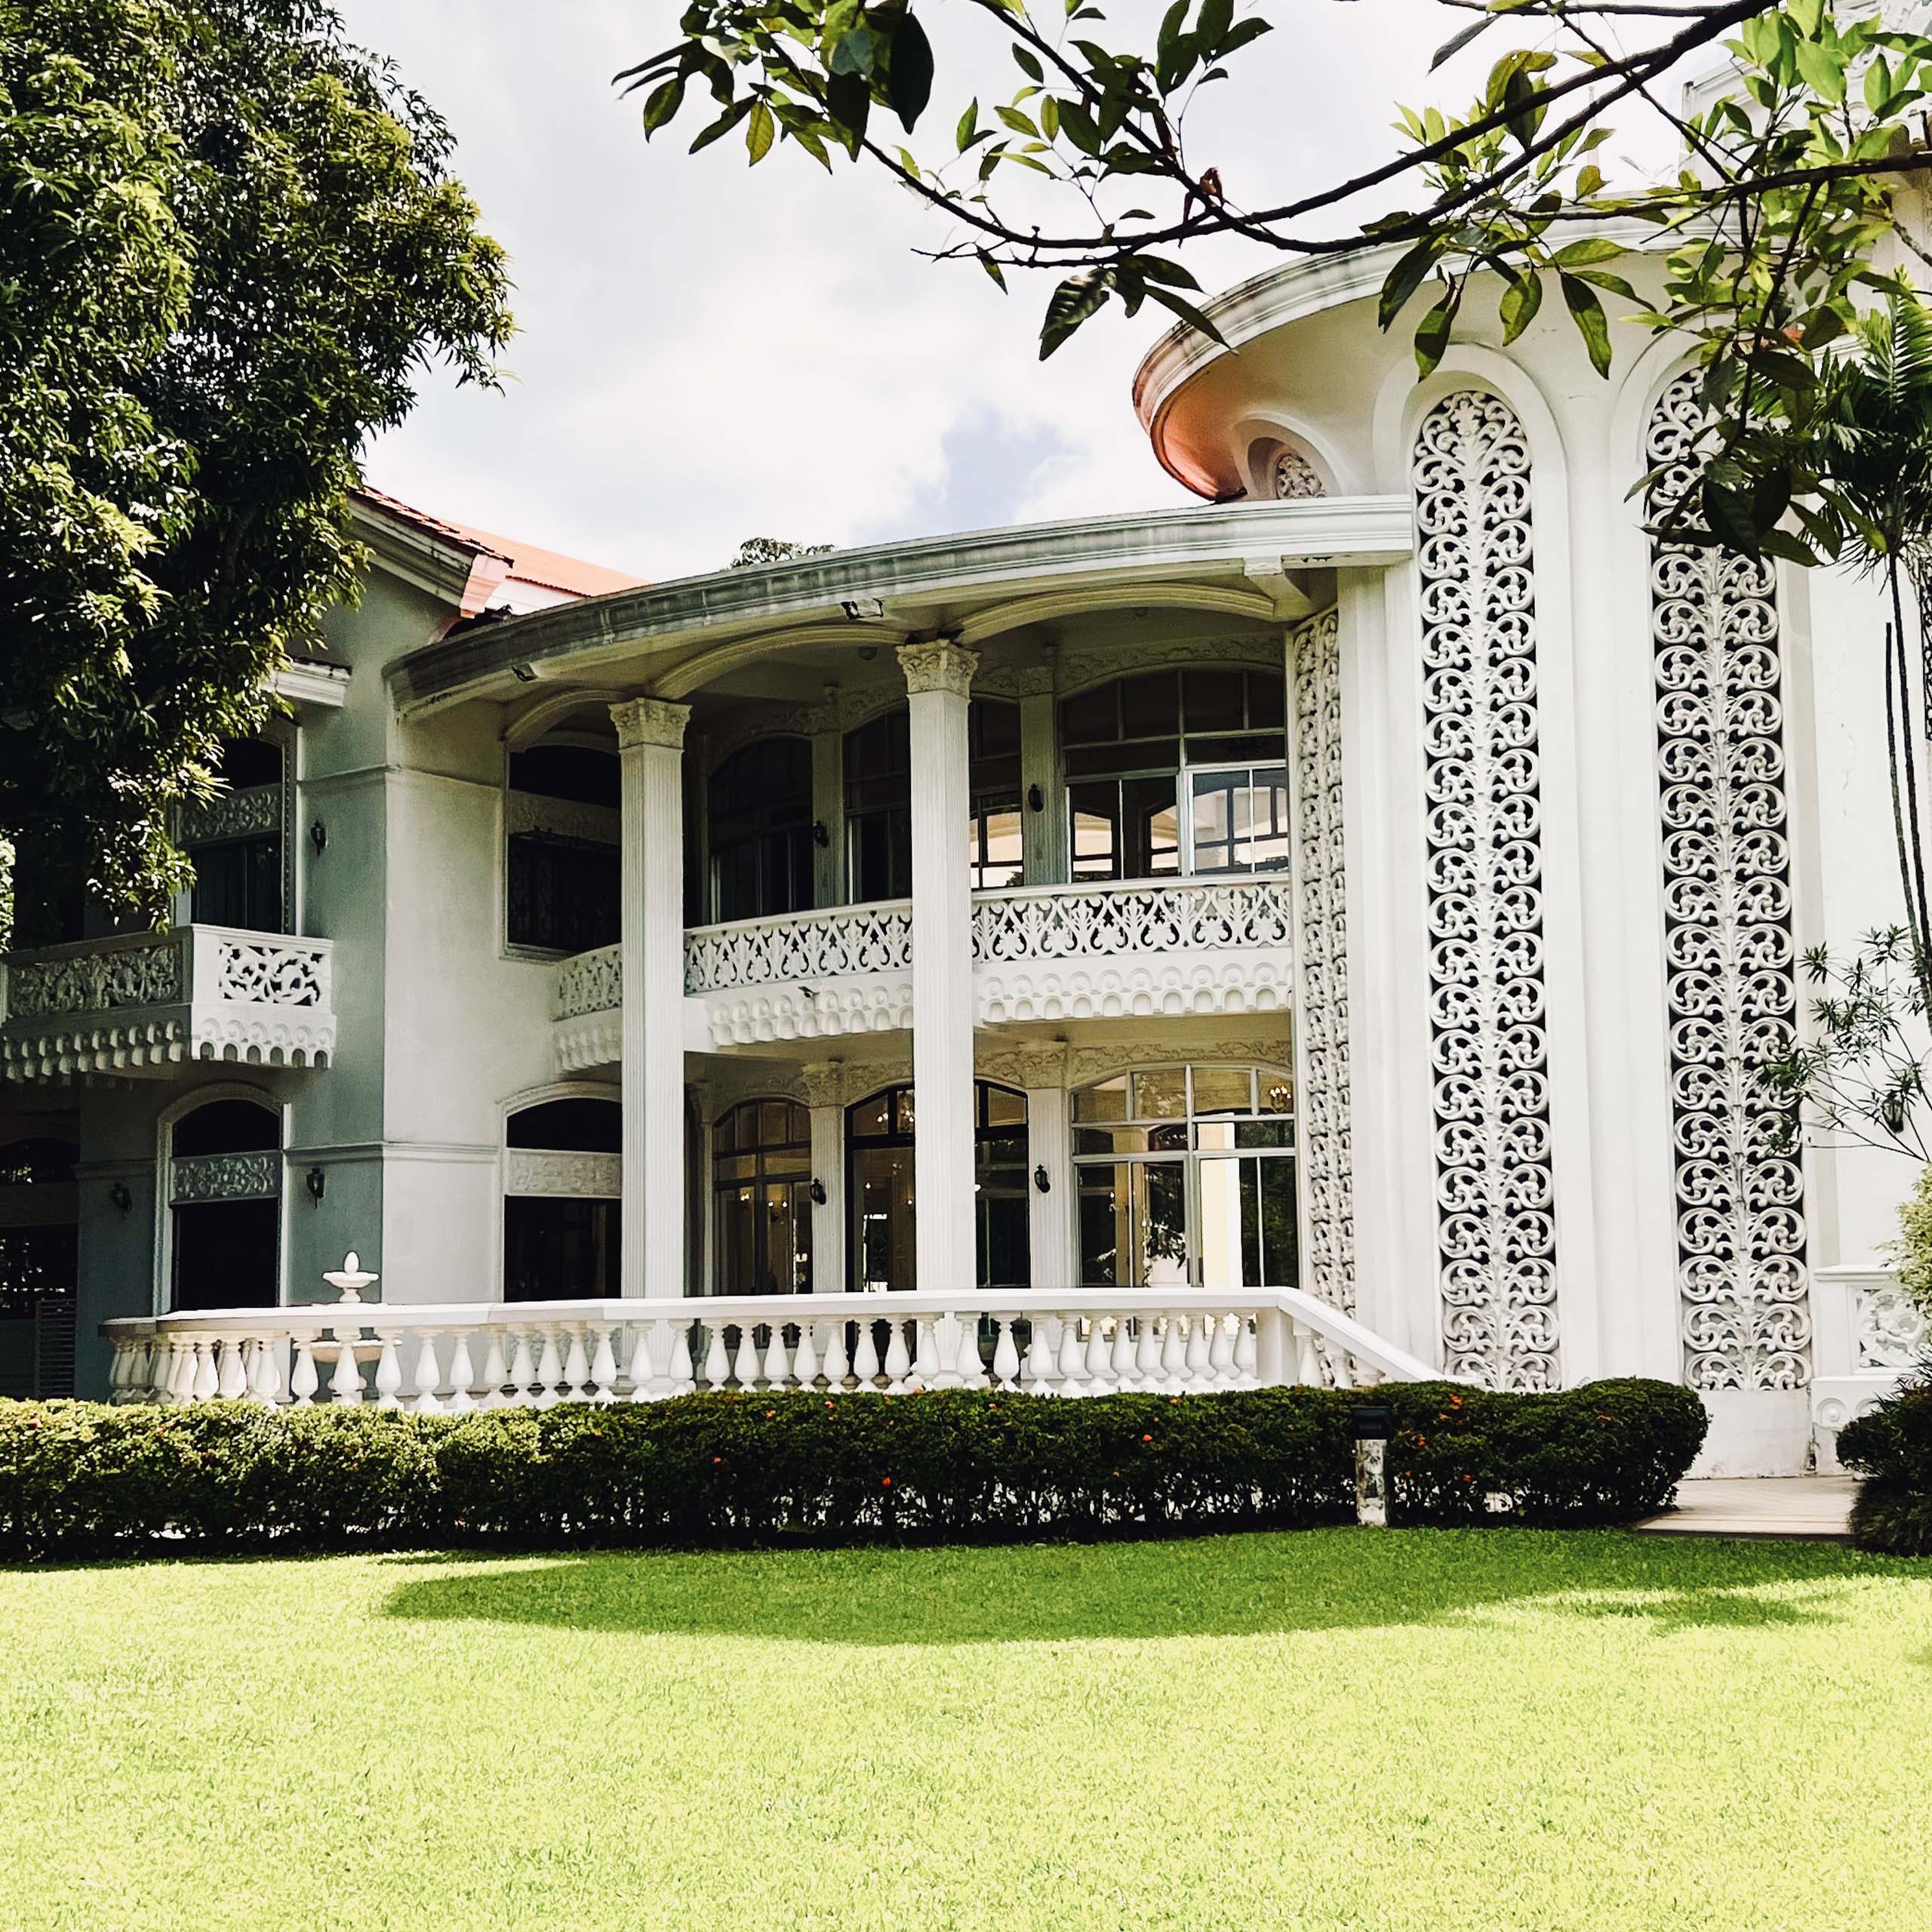 This Former Ancestral House is The Dreamiest Venue for Celebrations Big or Small